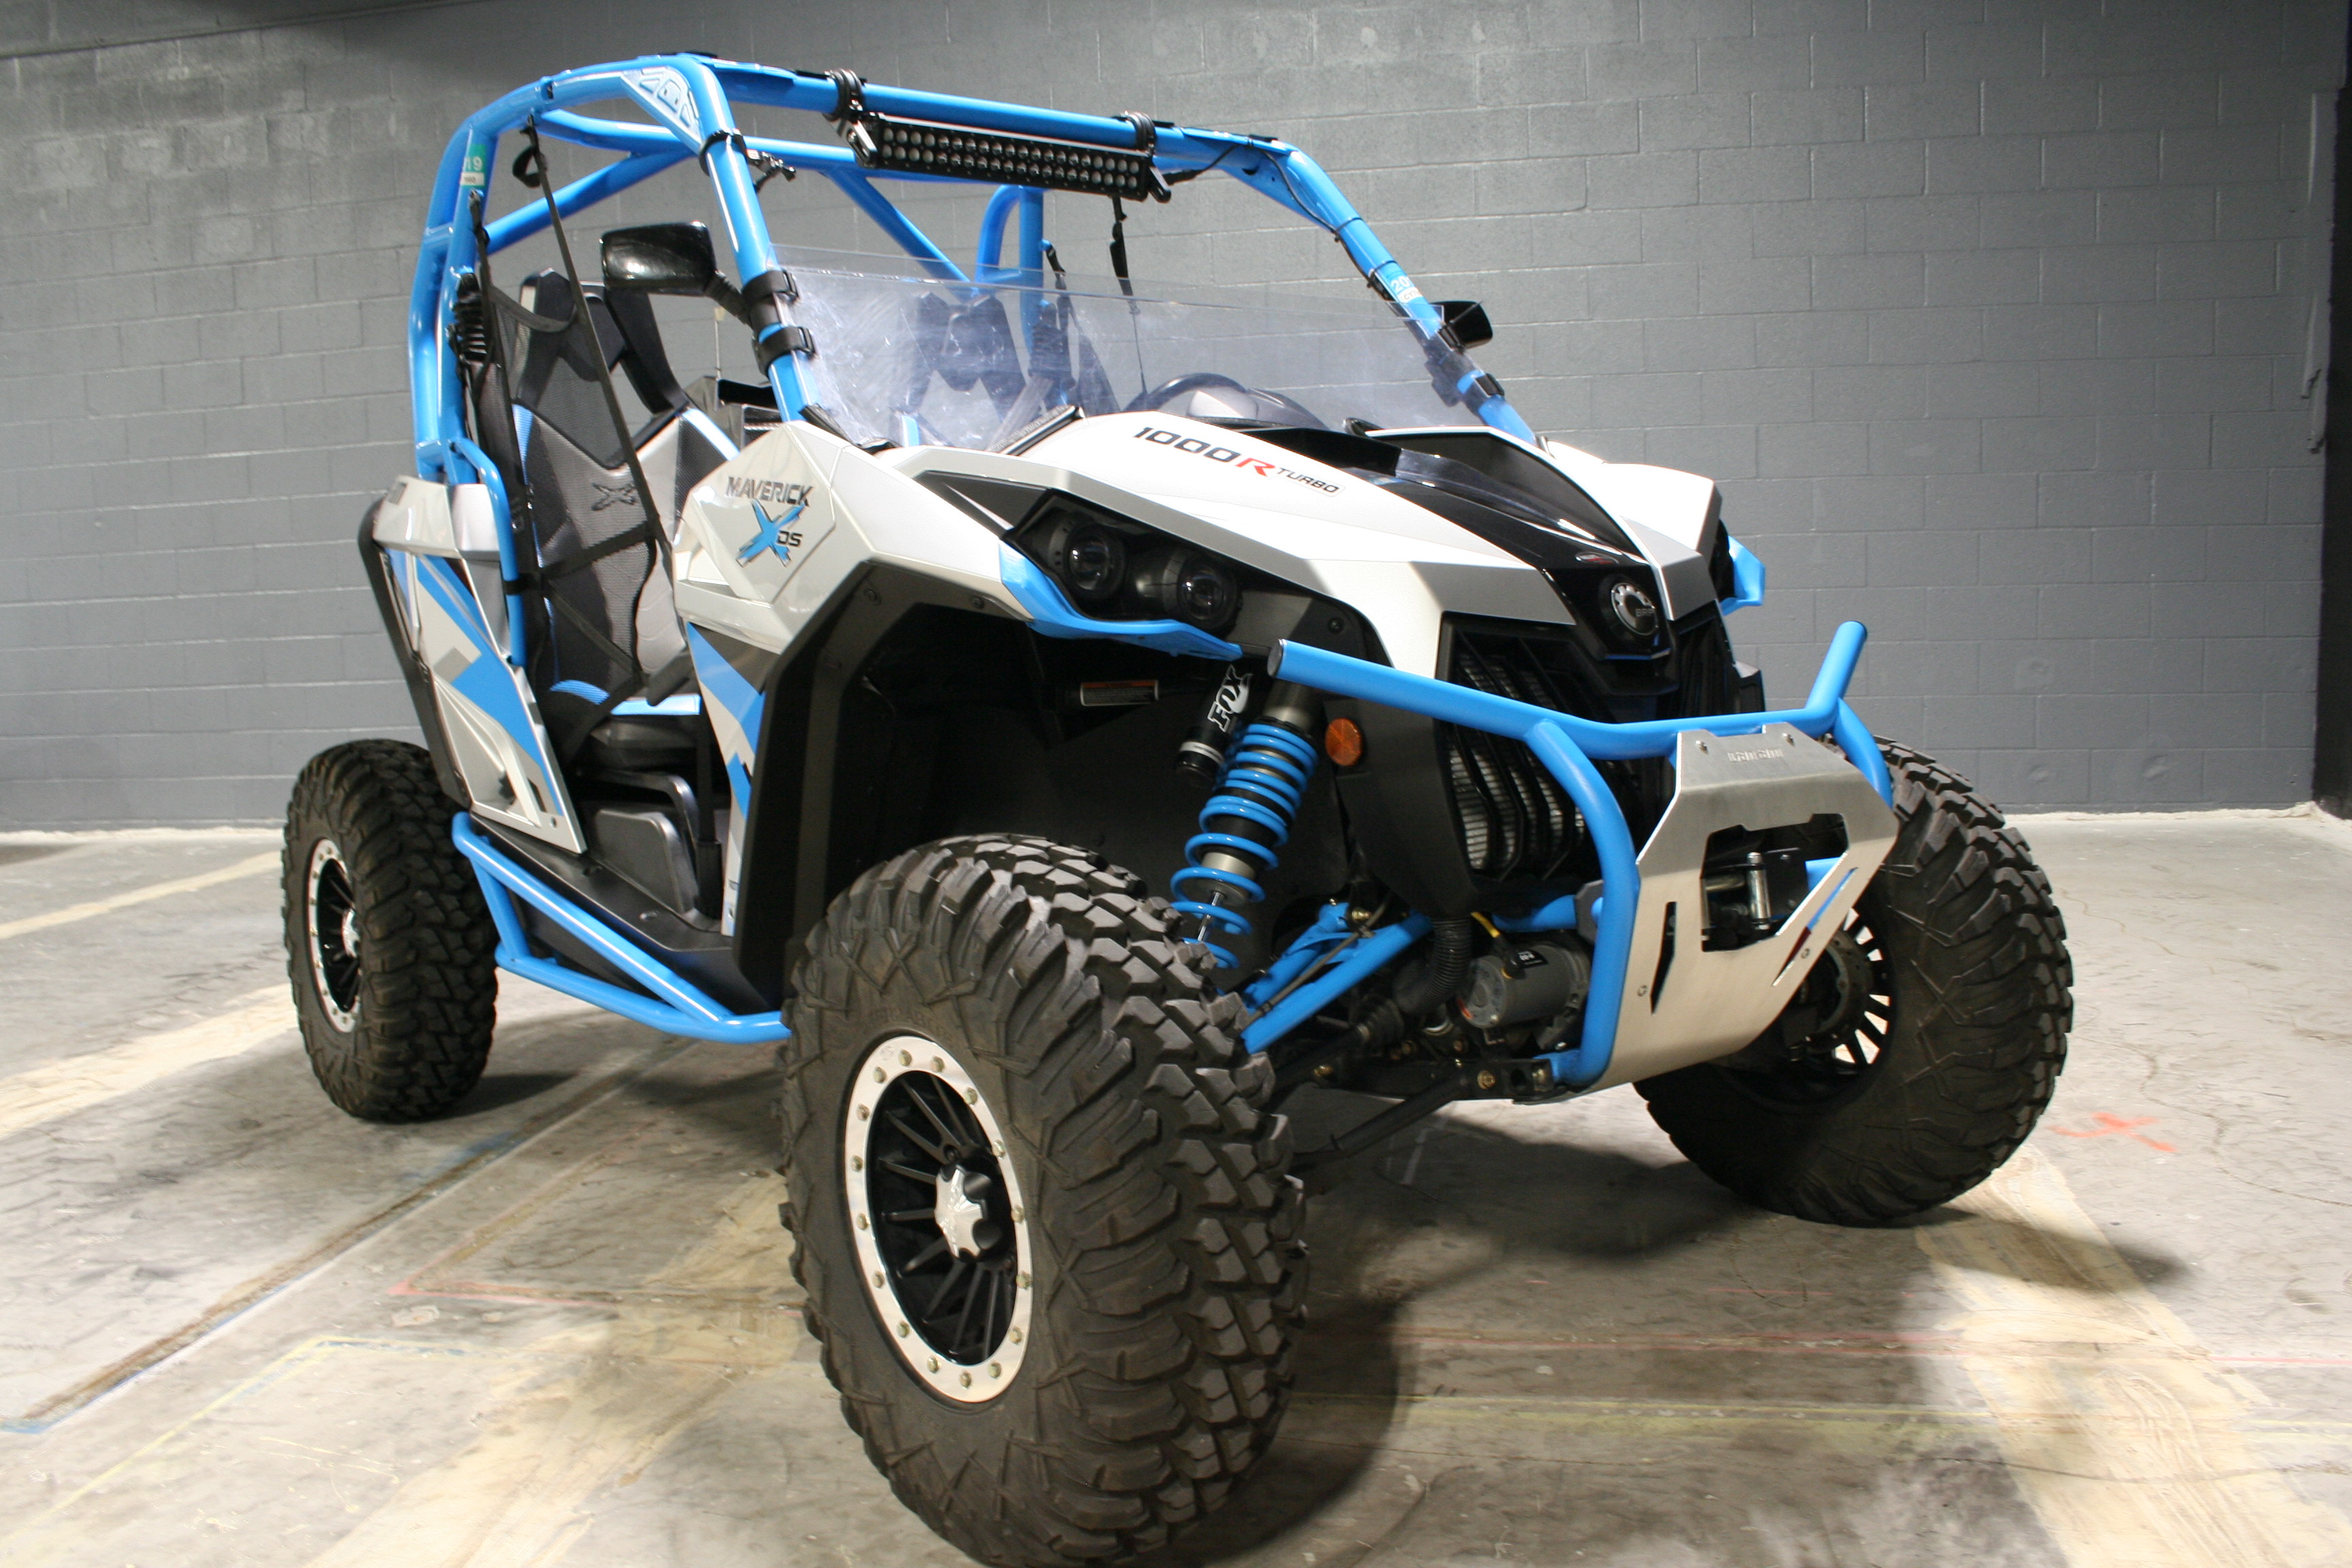 Pre-Owned 2016 Can-Am Maverick 1000R X ds TURBO UTV in Bedford #GJ003498 | Lucky Penny Cycles 2016 Can-am Maverick Max X Rs Turbo 1000r